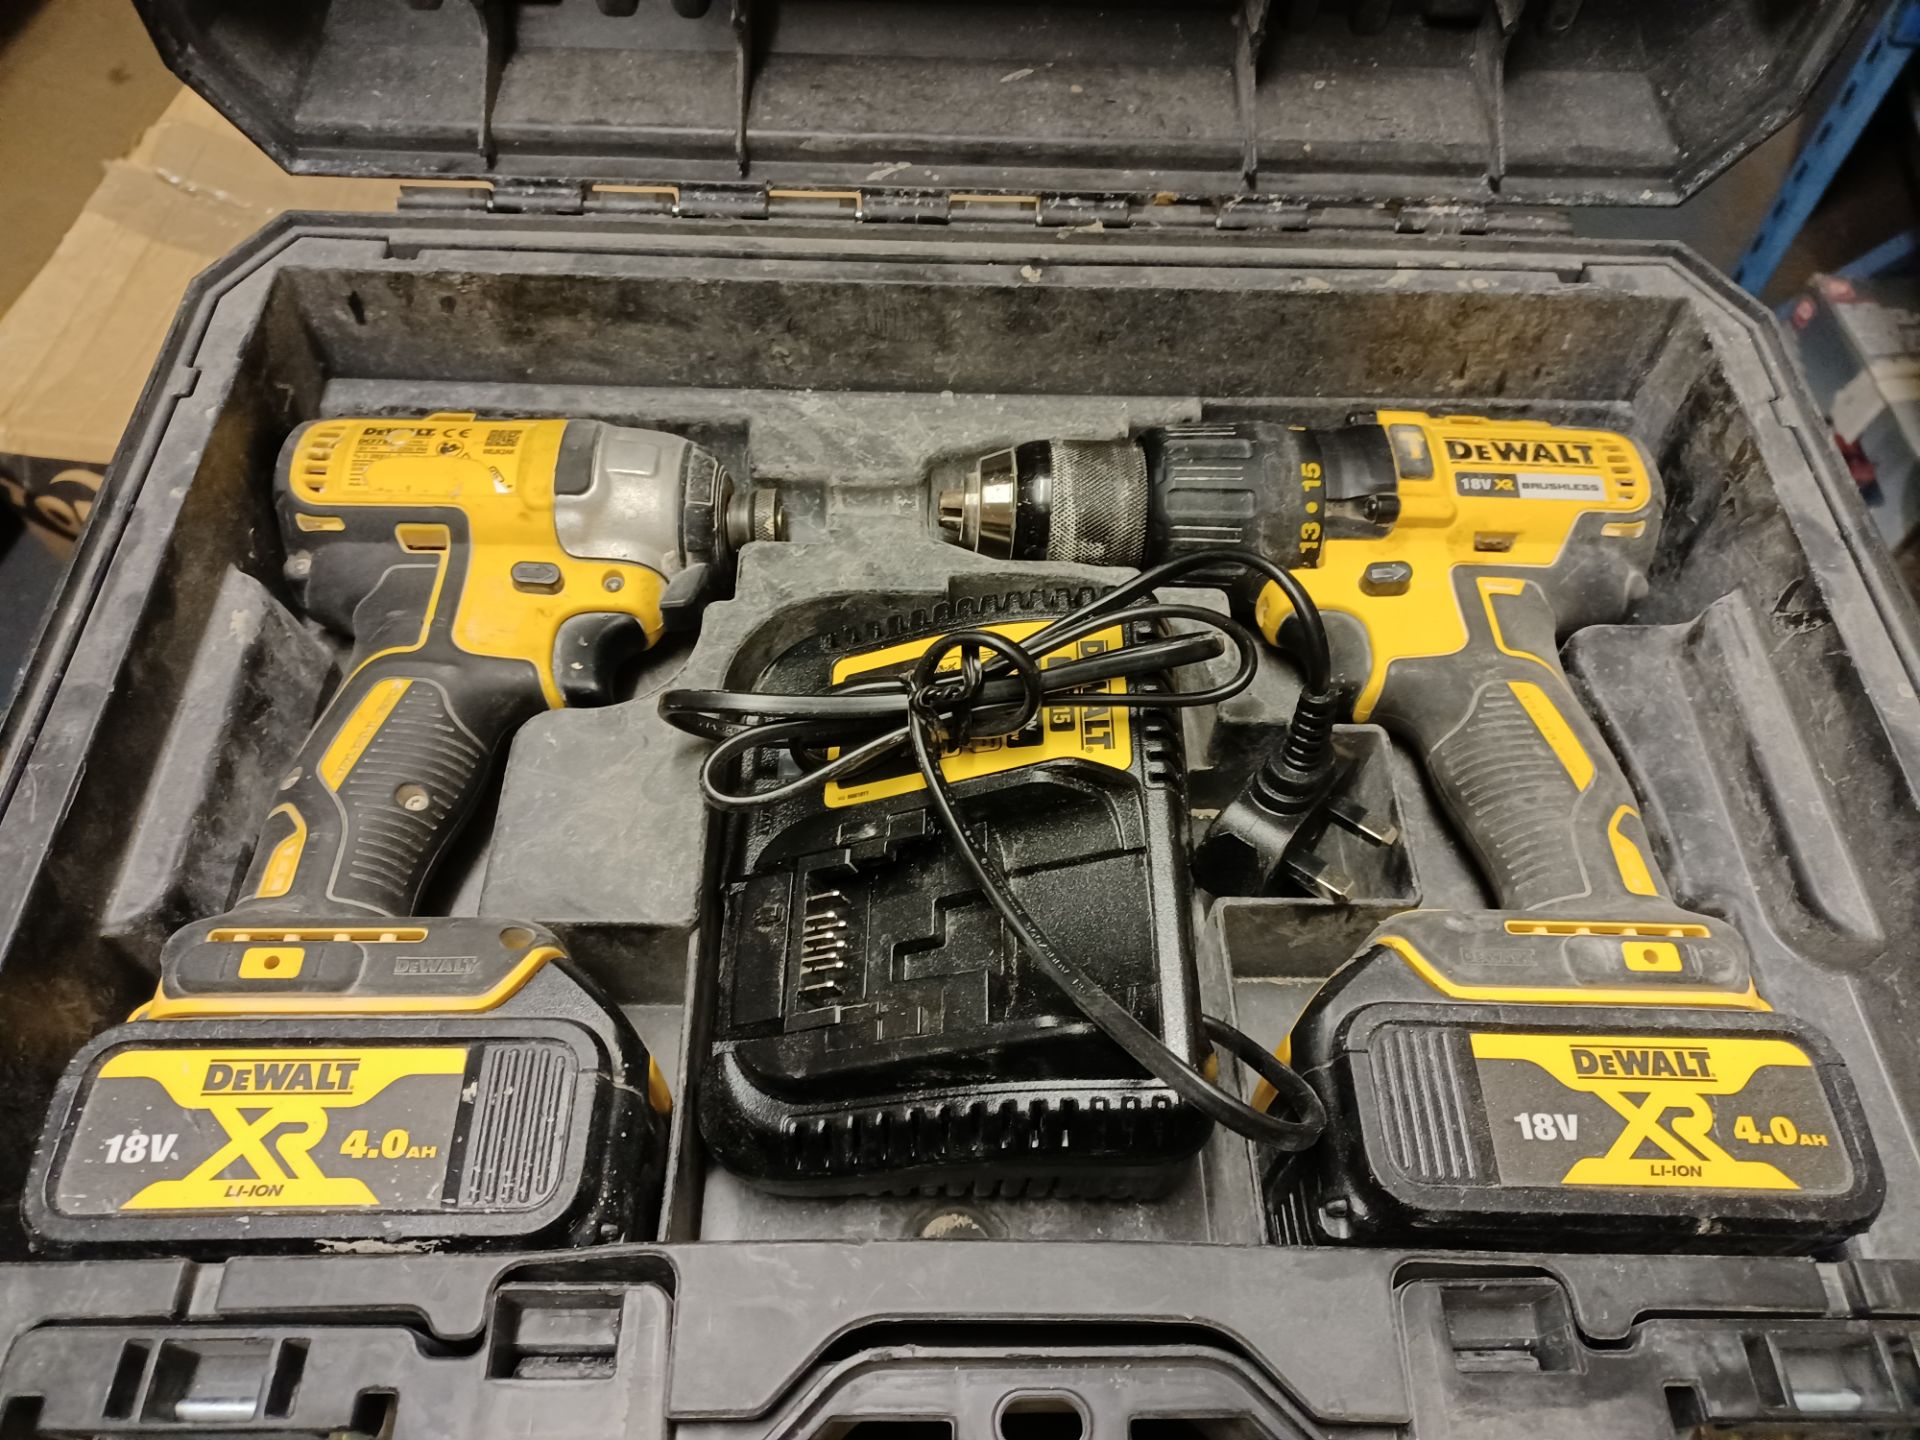 DEWALT DCK2060M2T-SFGB 18V 4.0AH LI-ION XR BRUSHLESS CORDLESS TWIN PACK WITH 2 BATTERIES CHARGER AND